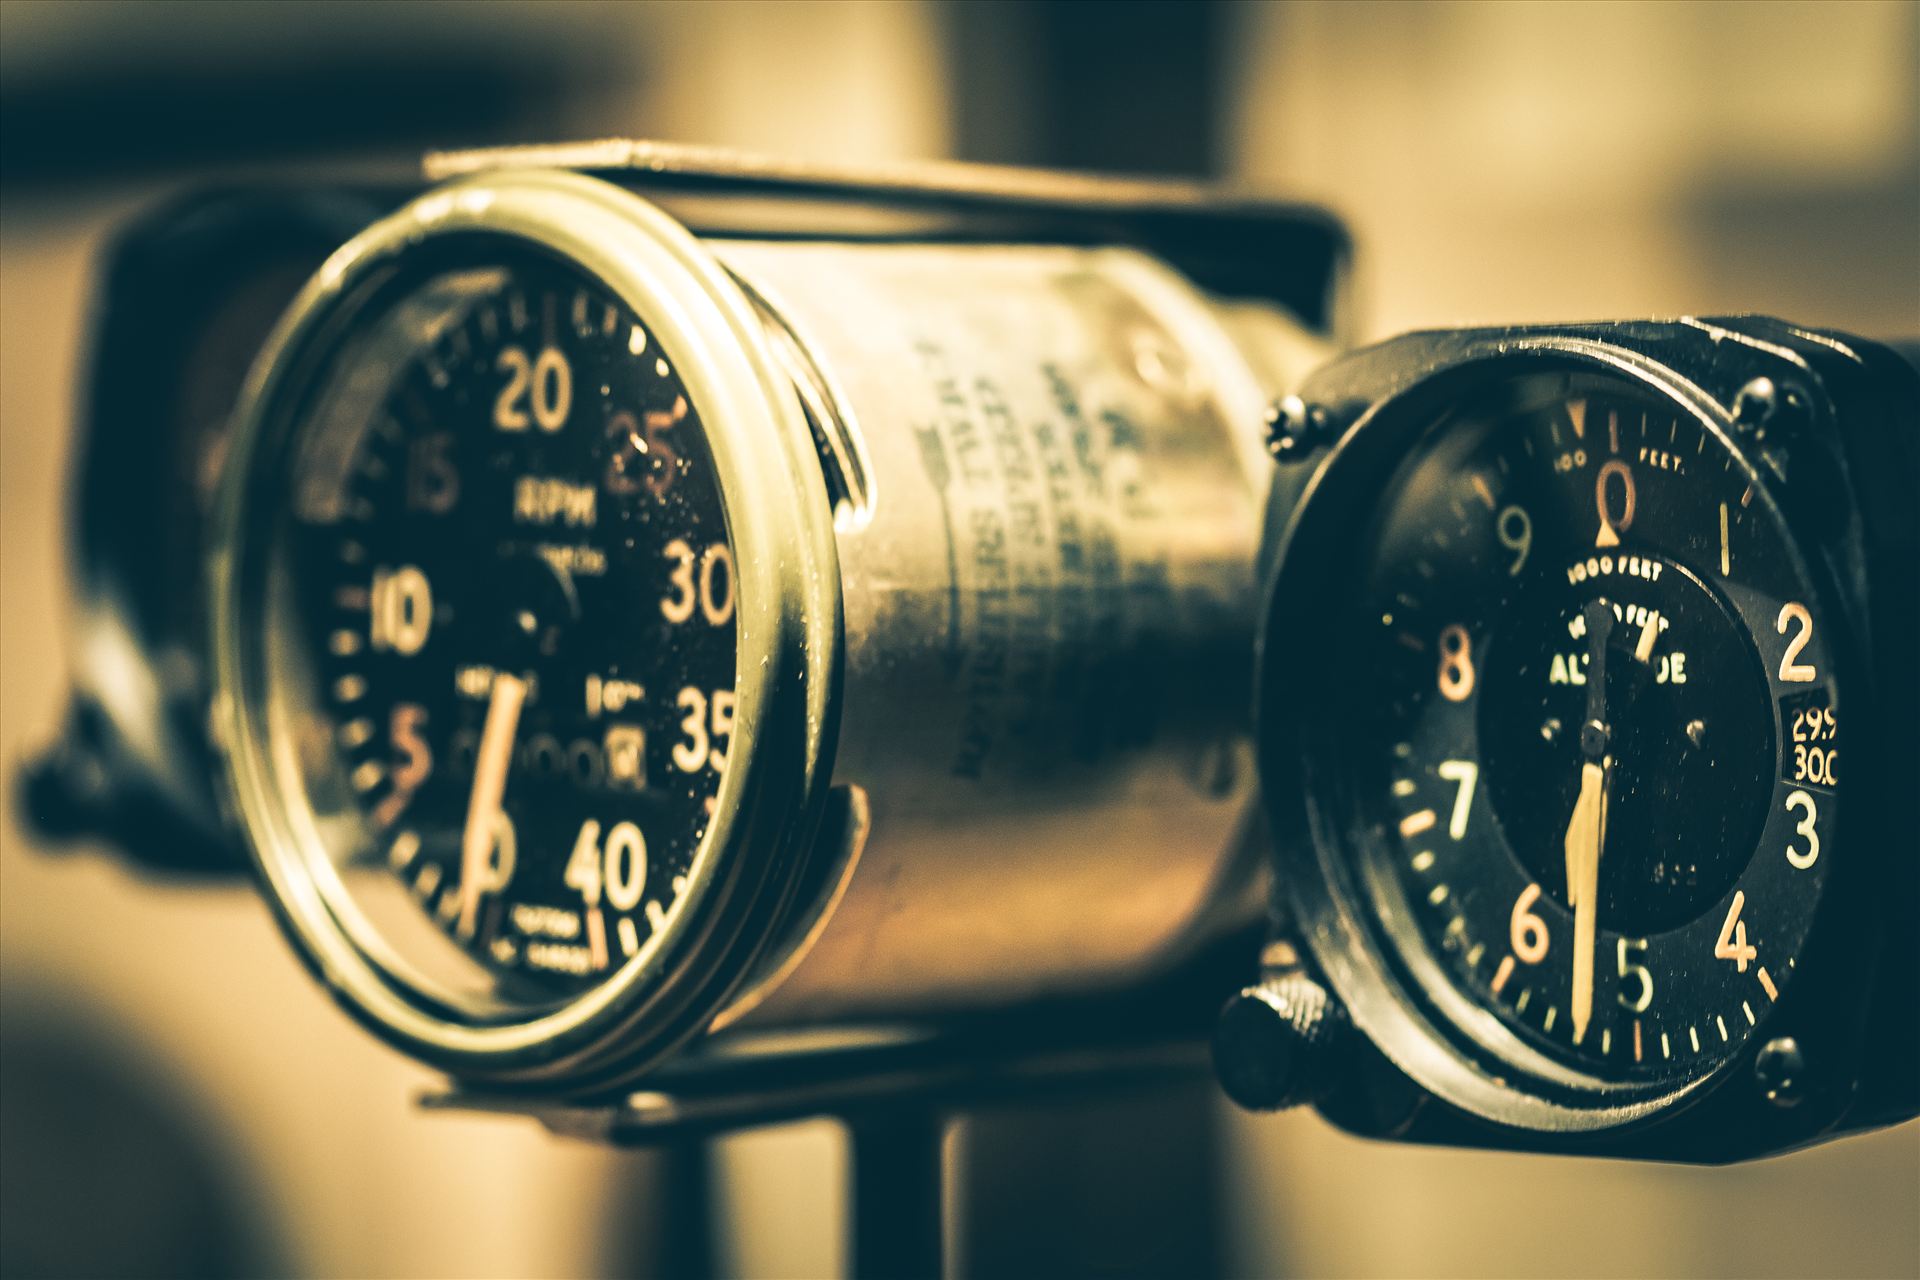 Dial it In Vintage aviation gauges at the Ghurka store. by Scott Smith Photos